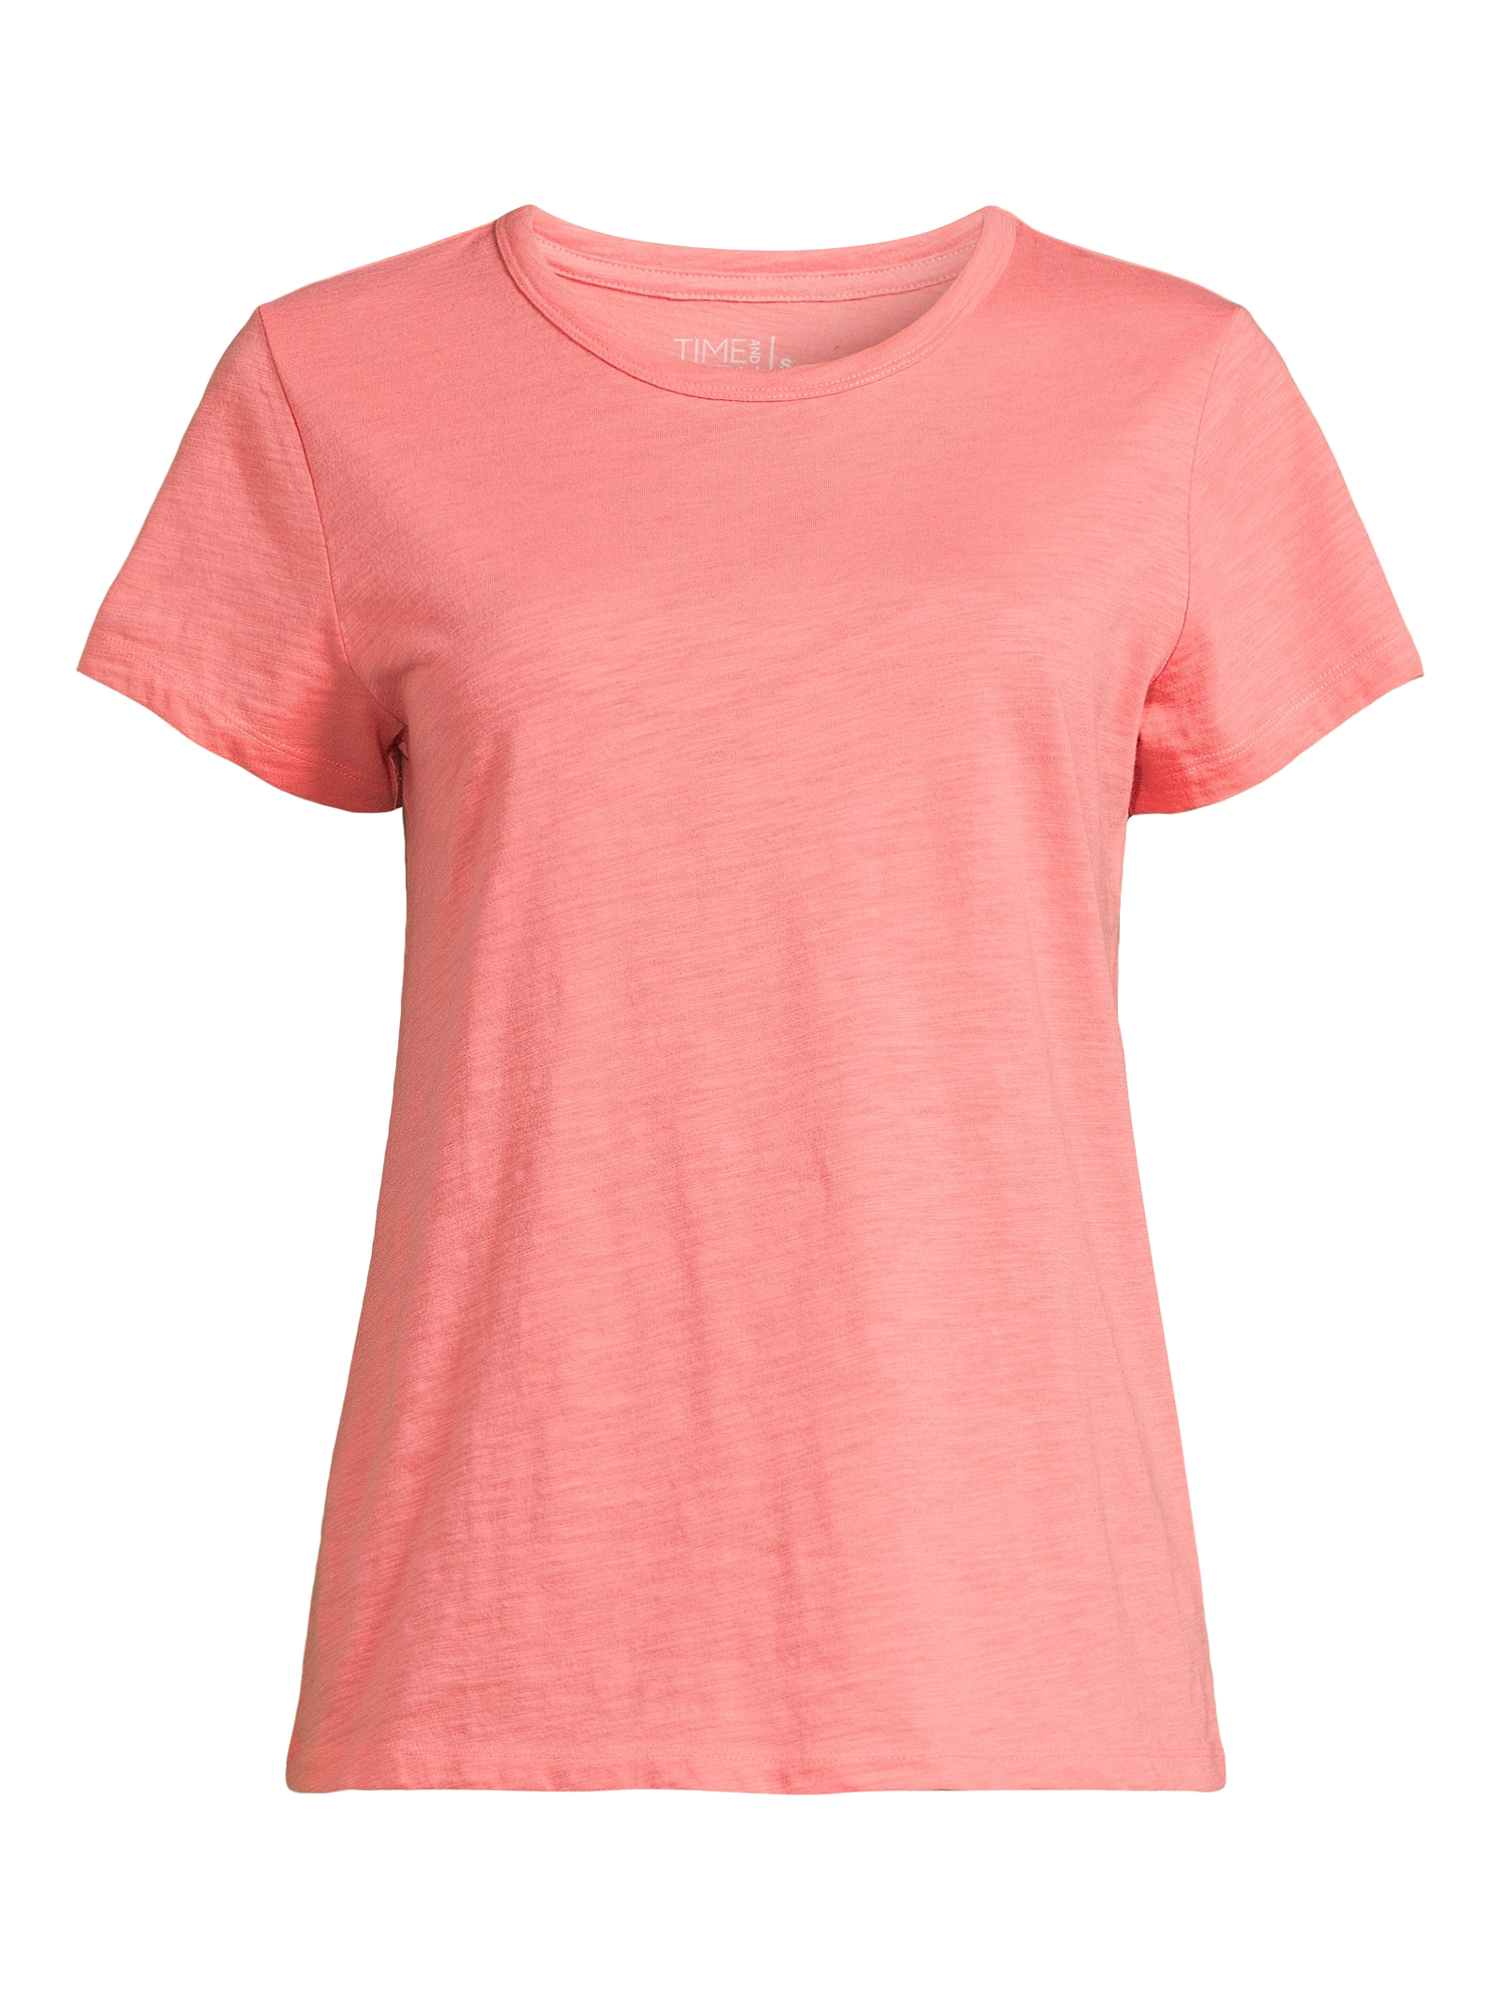 Time and Tru Women's Slub Texture Tee with Short Sleeves, Sizes S-XXXL - image 5 of 5